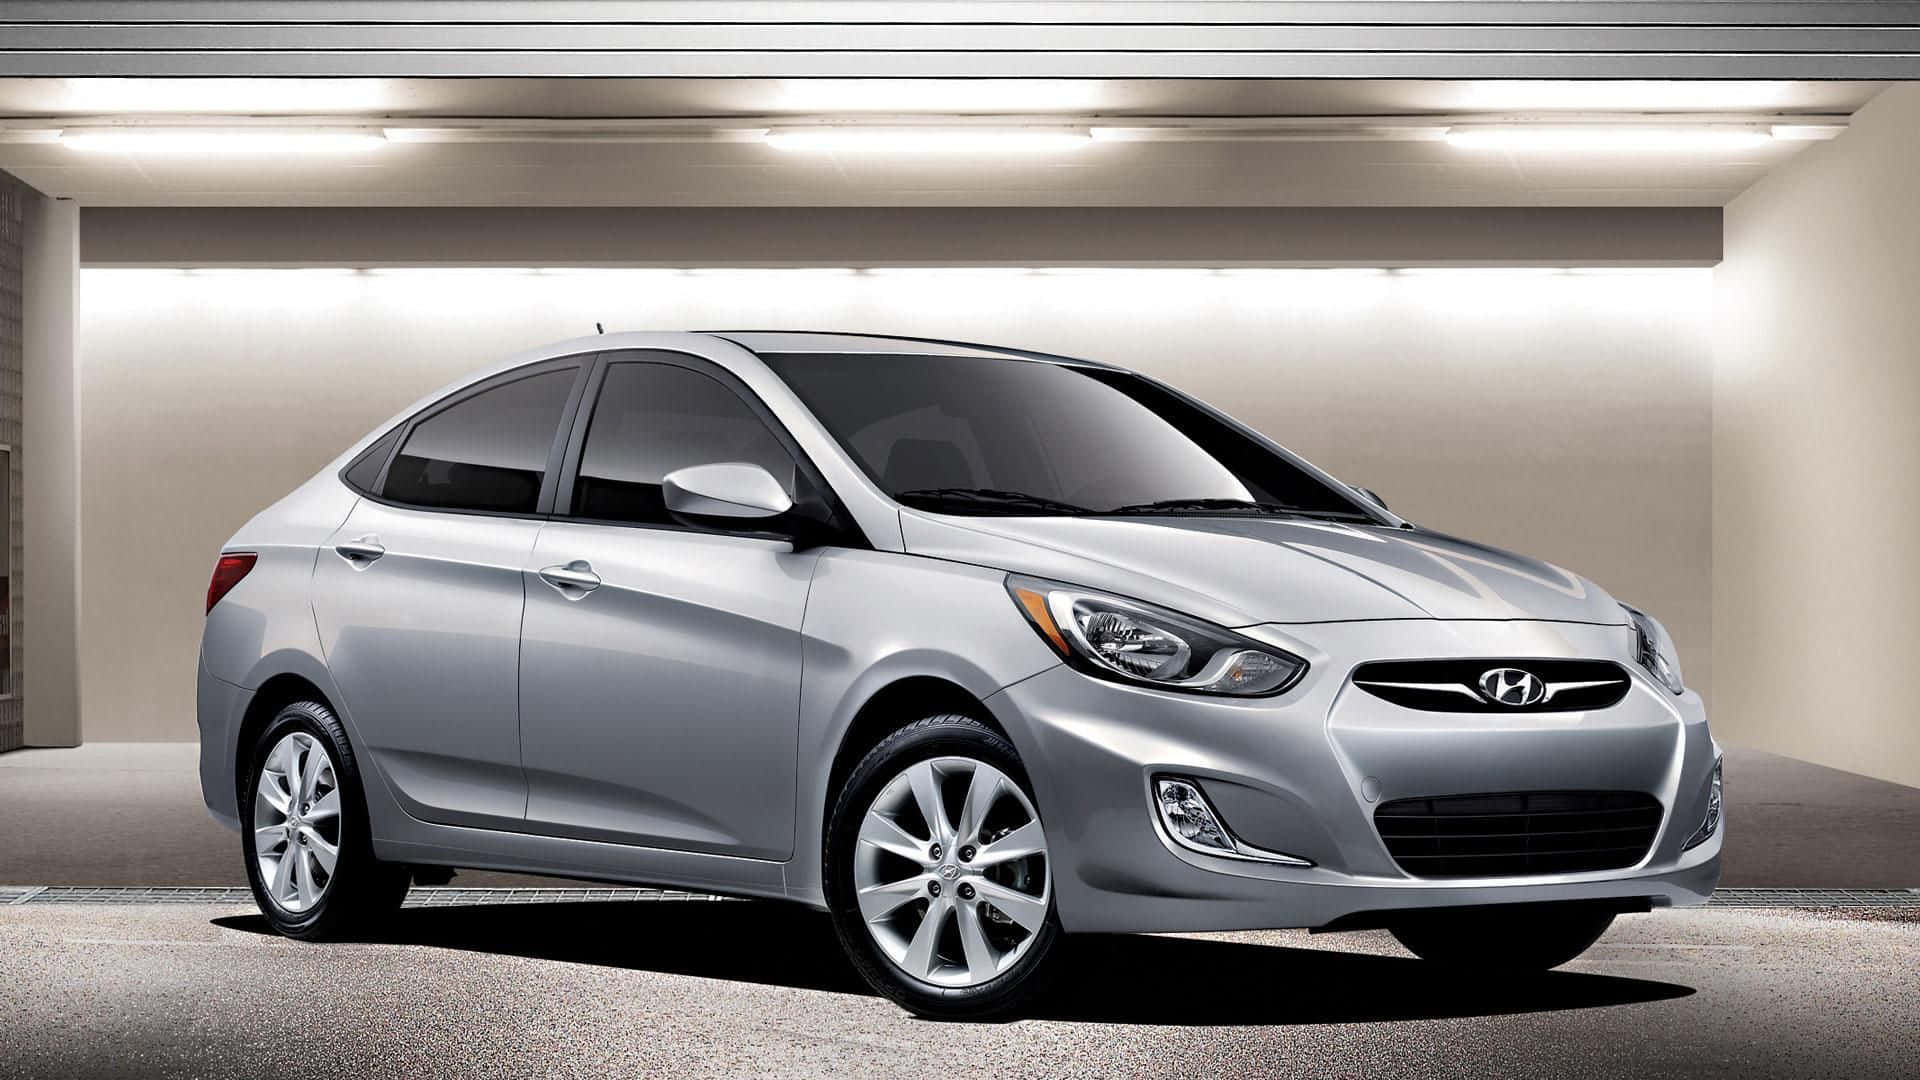 Captivating Hyundai Accent in Action Wallpaper